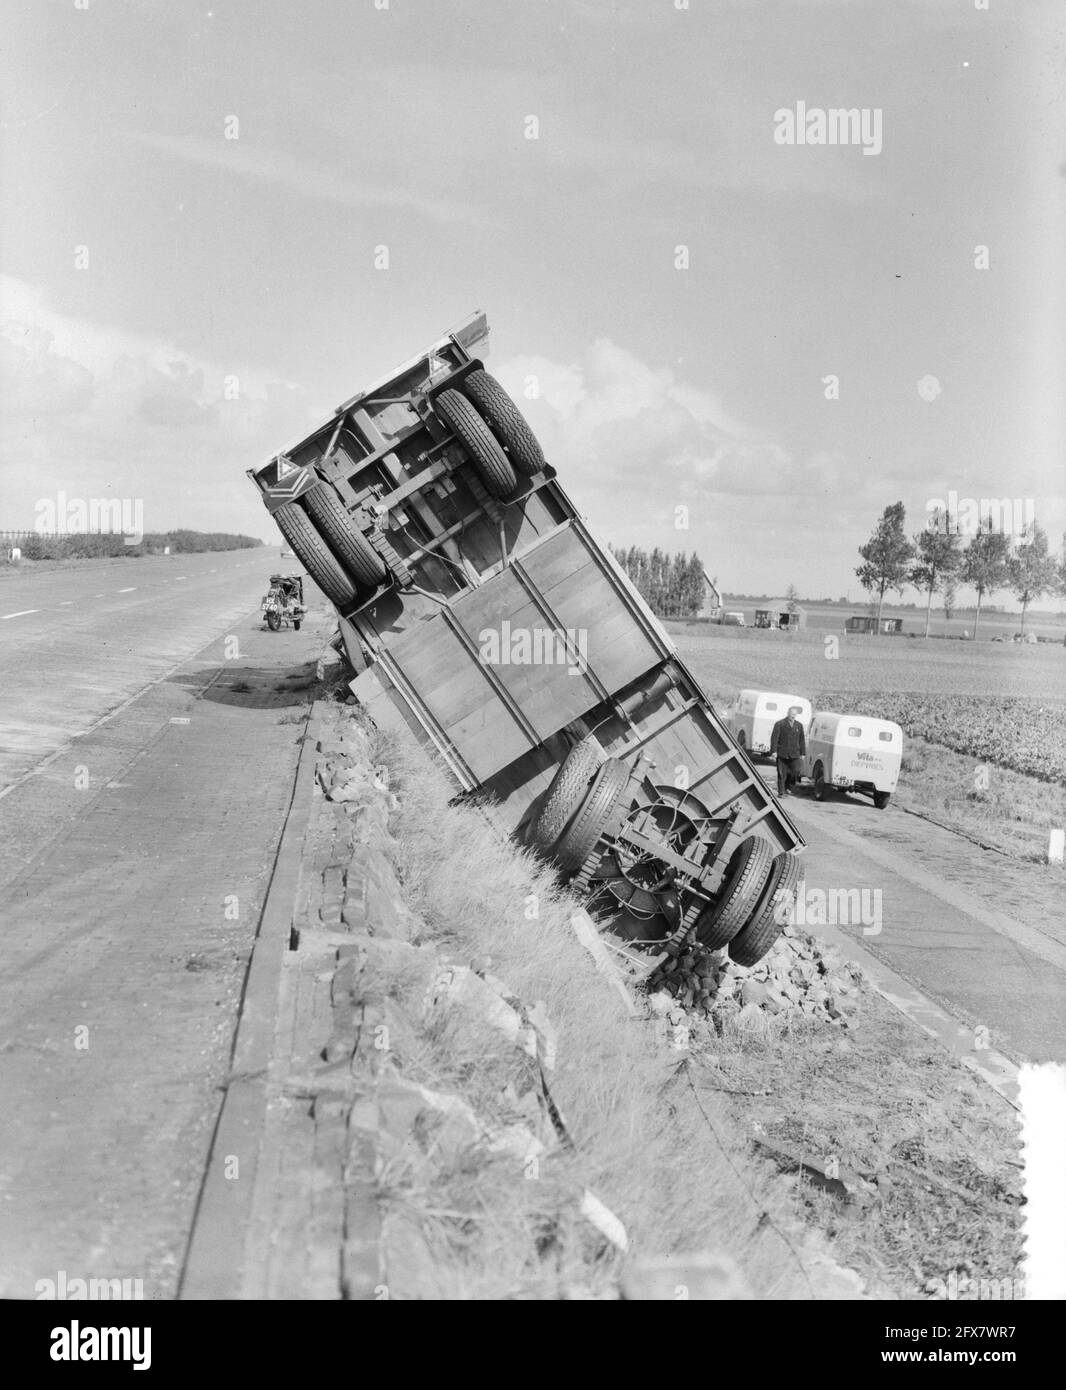 Trailer on Rijksweg in front of dike, September 10, 1953, trailers, dikes, The Netherlands, 20th century press agency photo, news to remember, documentary, historic photography 1945-1990, visual stories, human history of the Twentieth Century, capturing moments in time Stock Photo